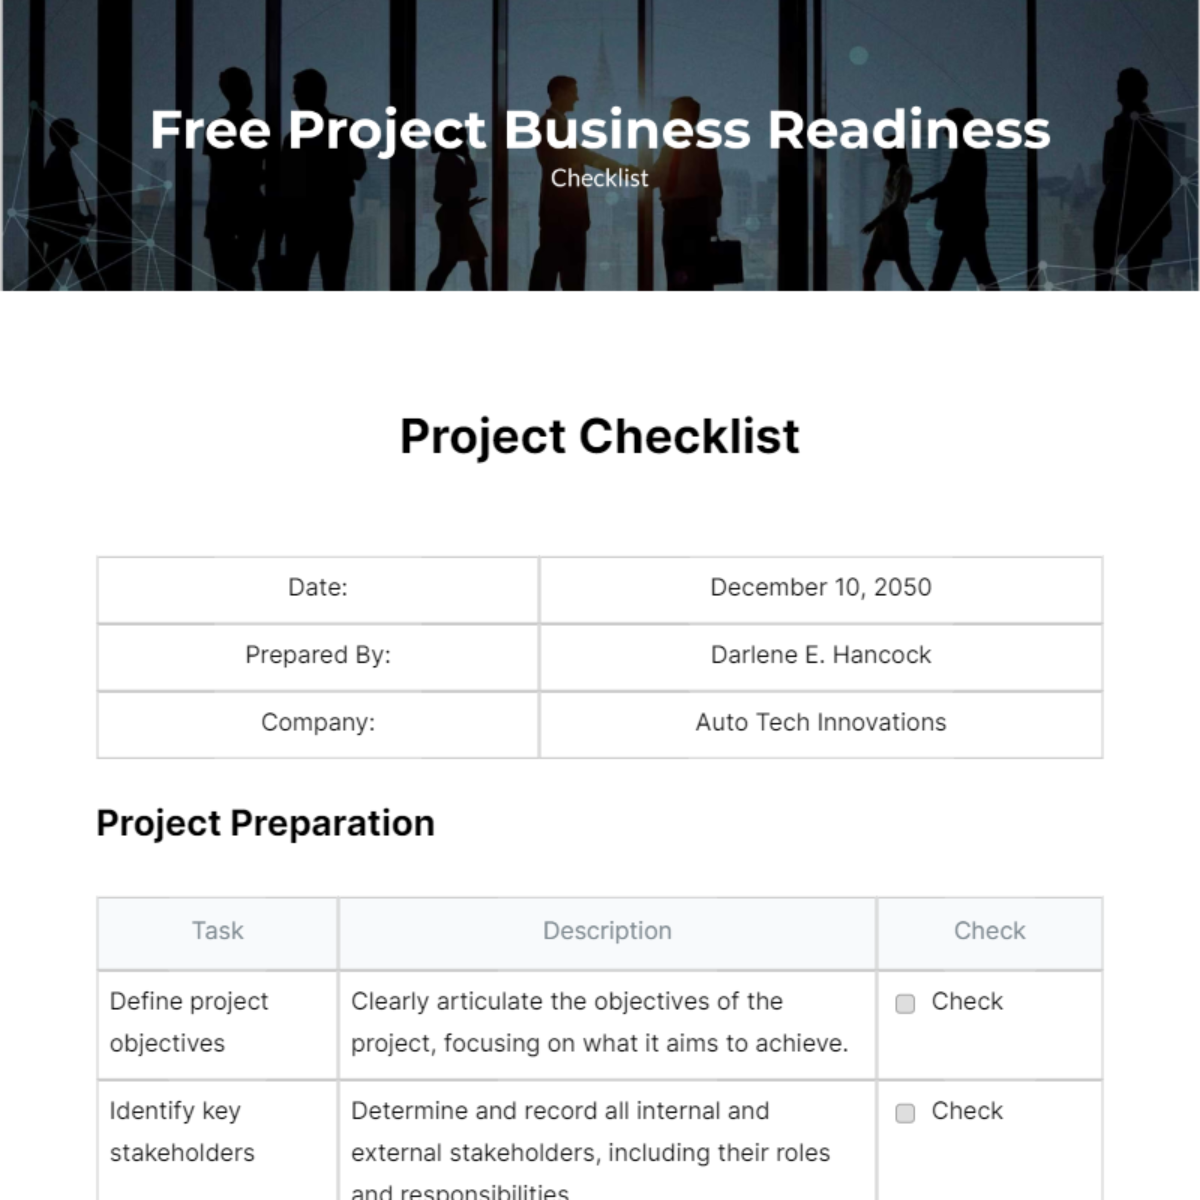 Project Business Readiness Checklist Template - Edit Online & Download ...